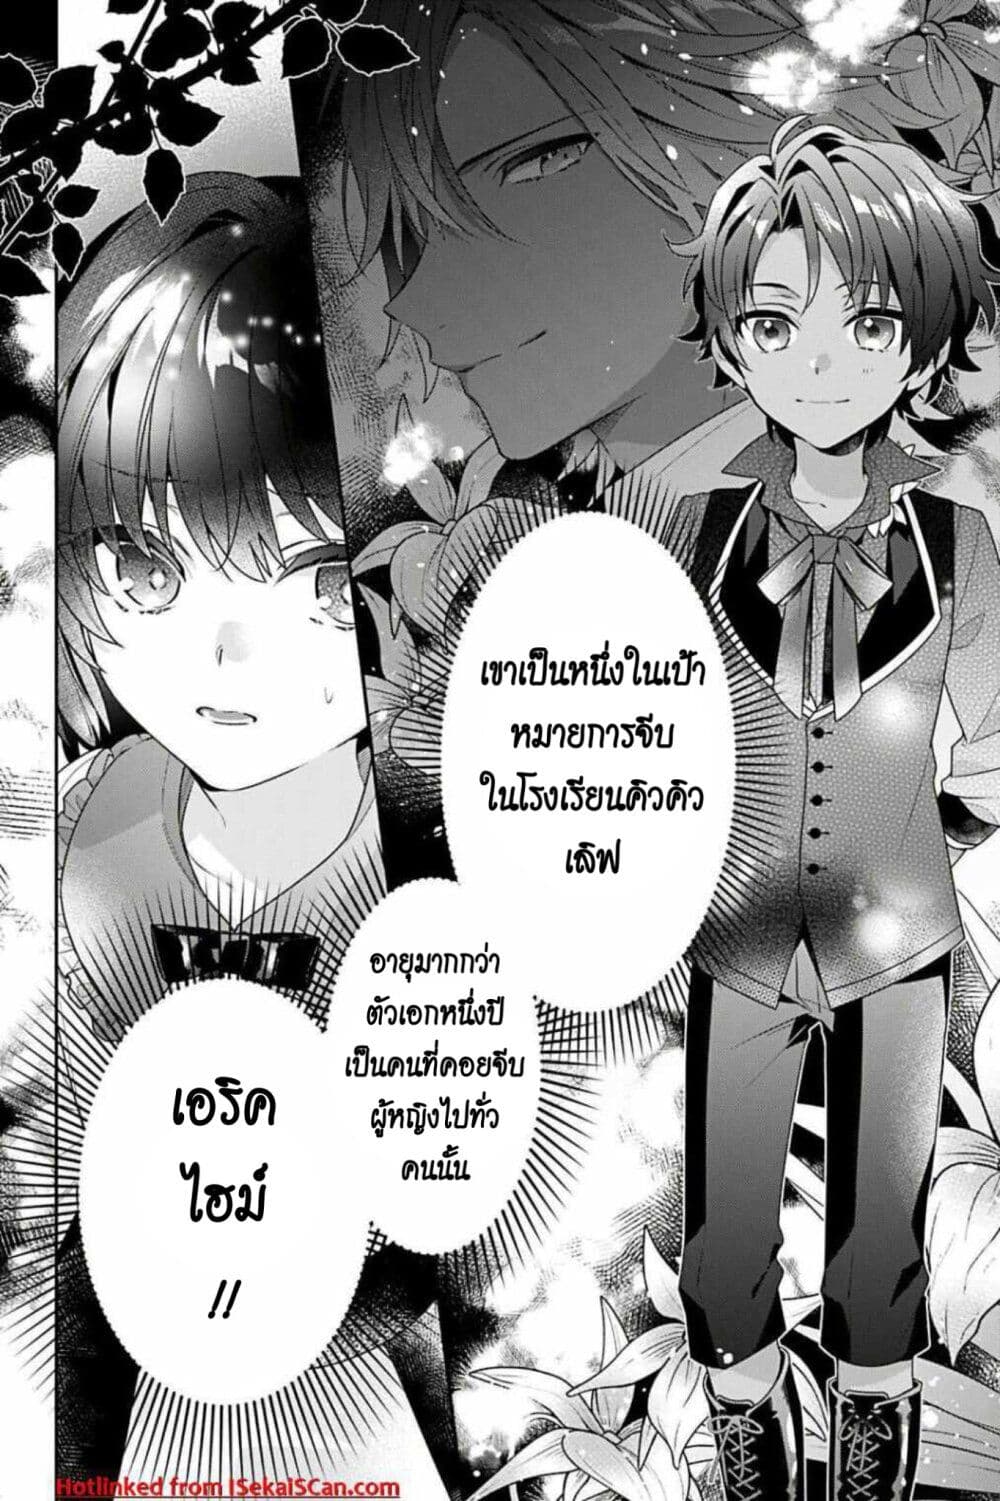 I Was Reincarnated as the Villainess in an Otome Game but the Boys Love Me Anyway! เกิดใหม่เป็นนางร้าย แต่เป้าหมายการจีบสุดจะไม่ปกติ !! 4-4